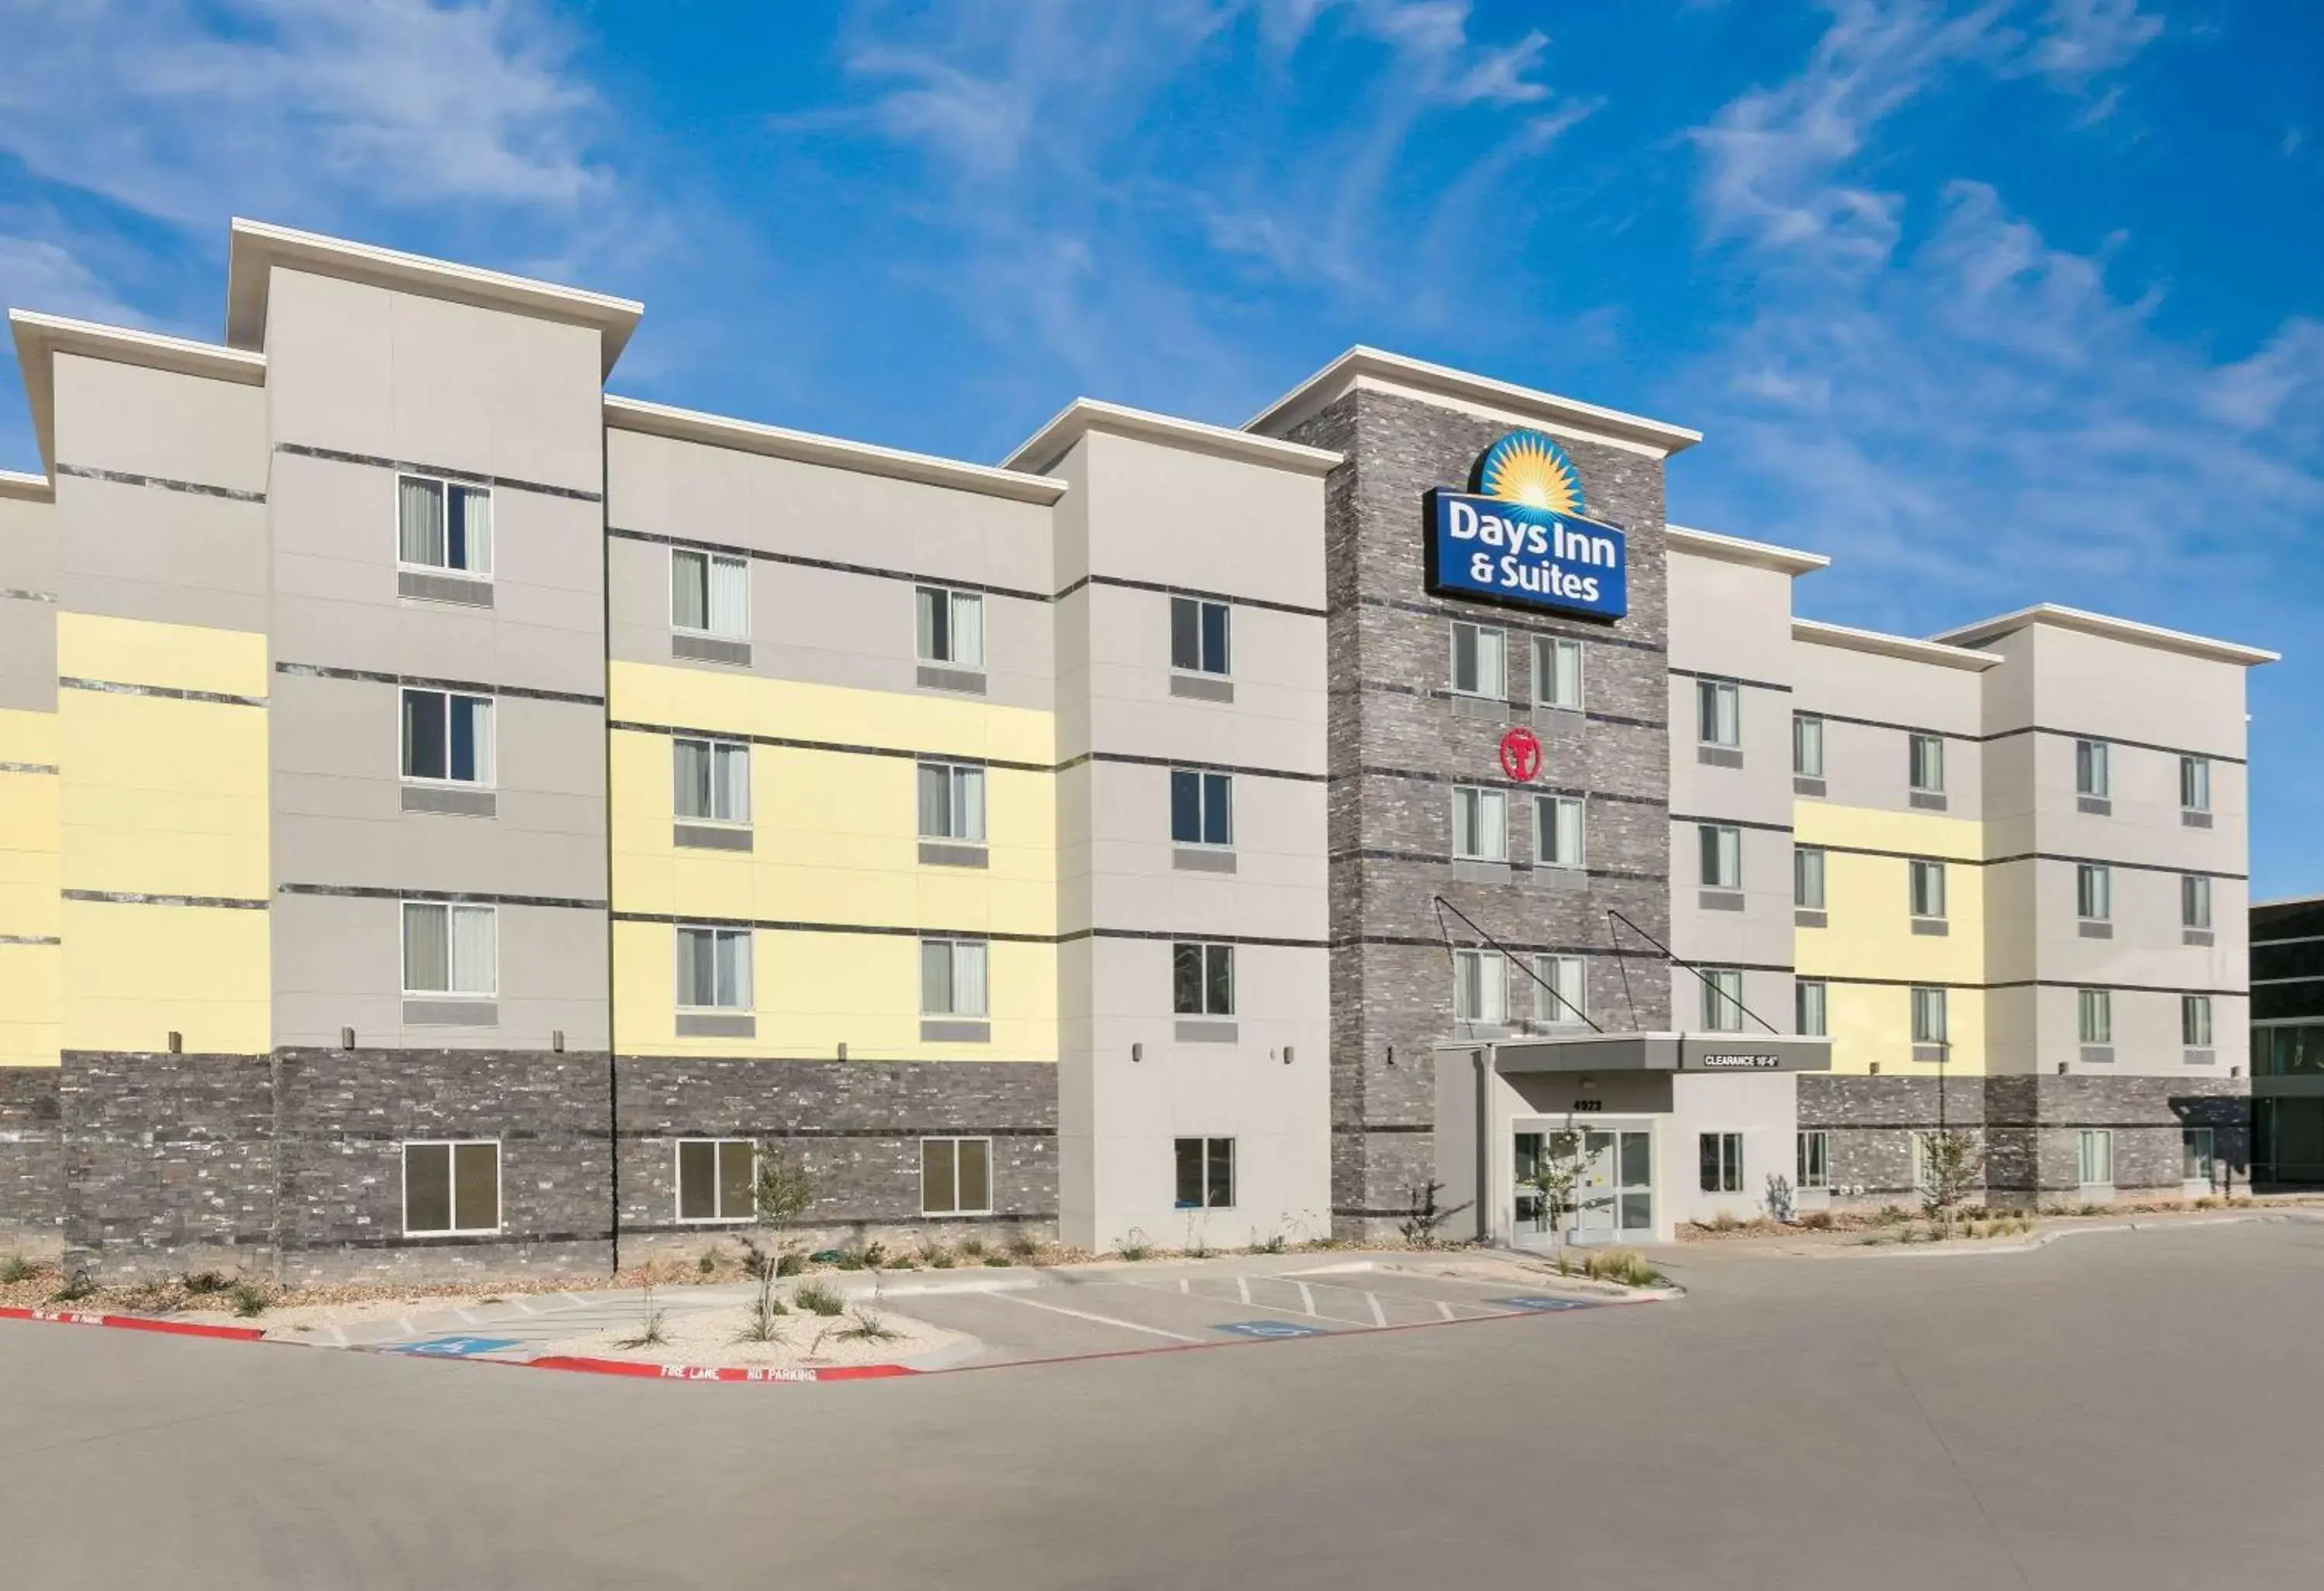 Property building in Days Inn & Suites by Wyndham Lubbock Medical Center